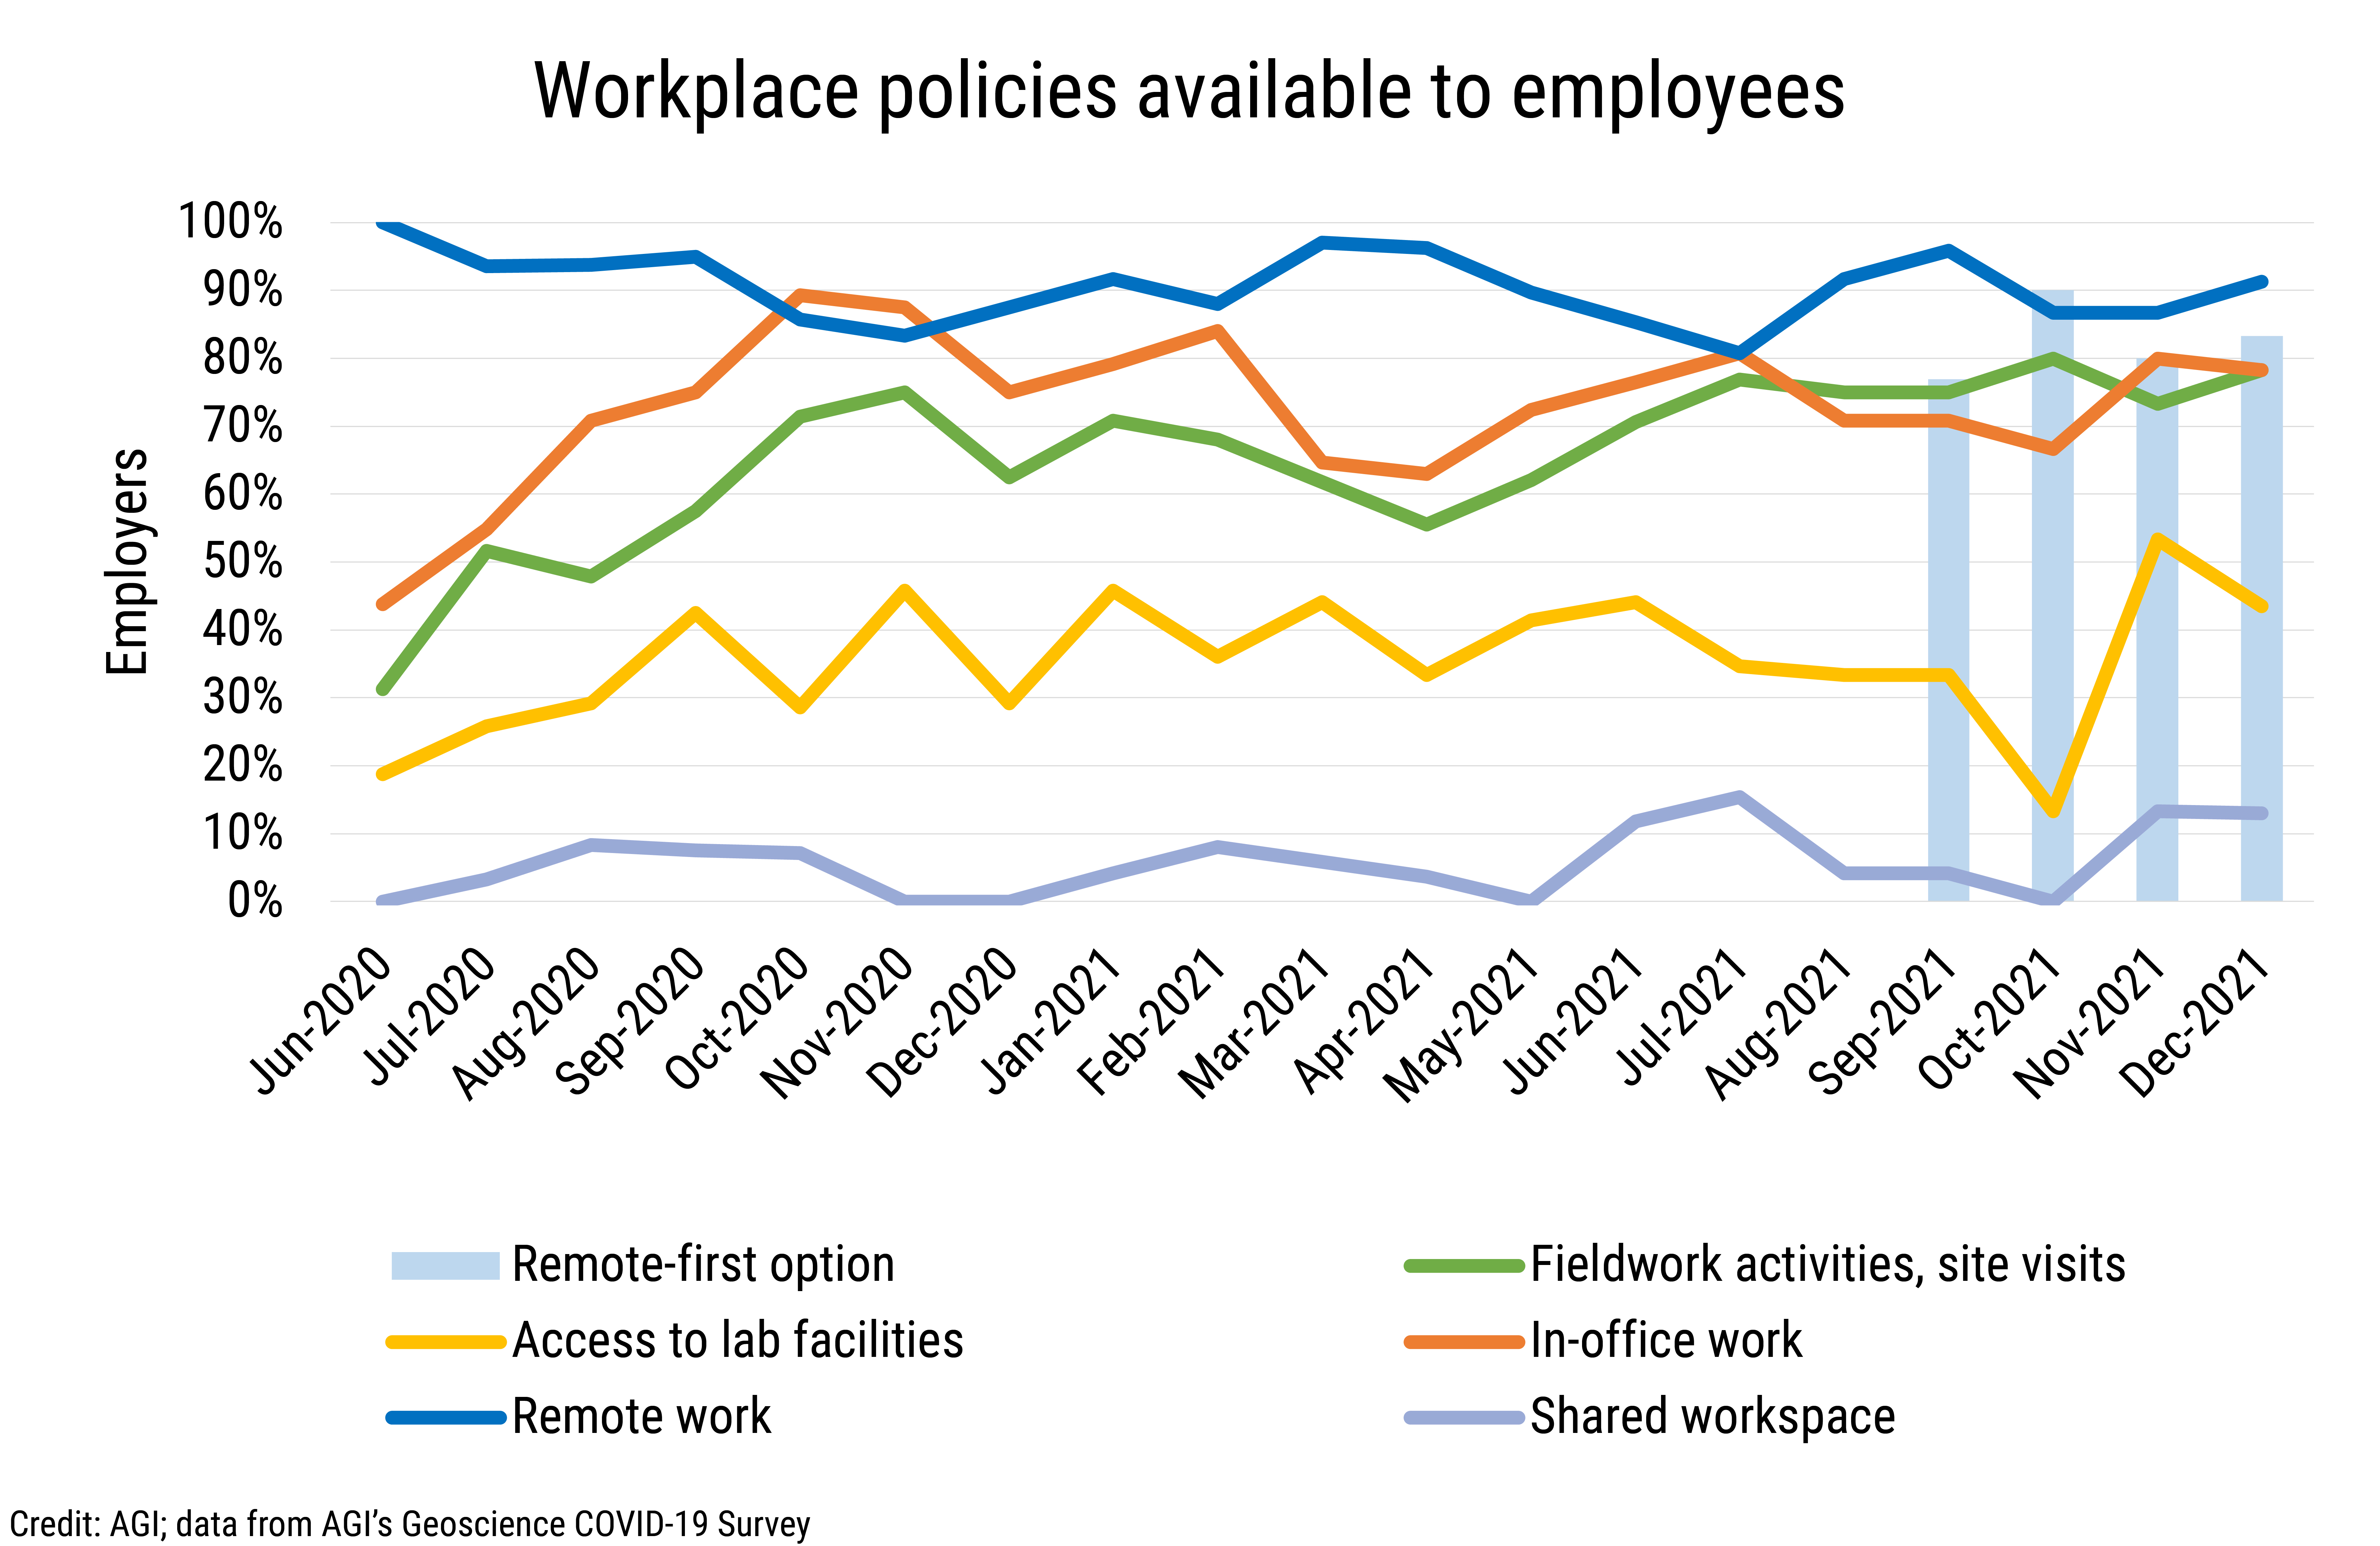 DB_2022-003 chart 05: Workplace policies available to employees (Credit: AGI; data from AGI's Geoscience COVID-19 Survey)